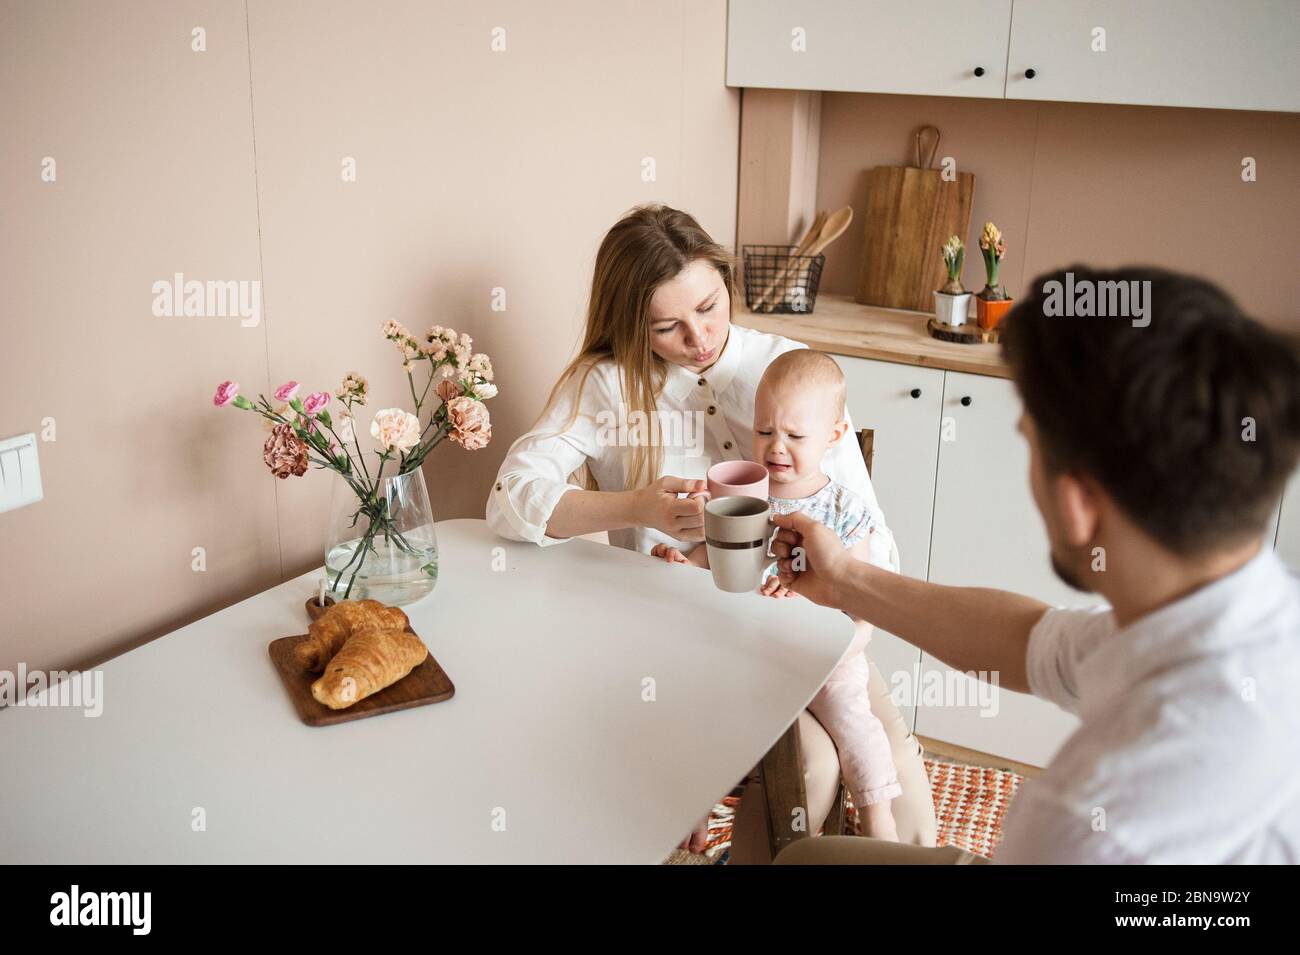 Parents comfort a crying child in the modern kitchen. Family routines Stock Photo